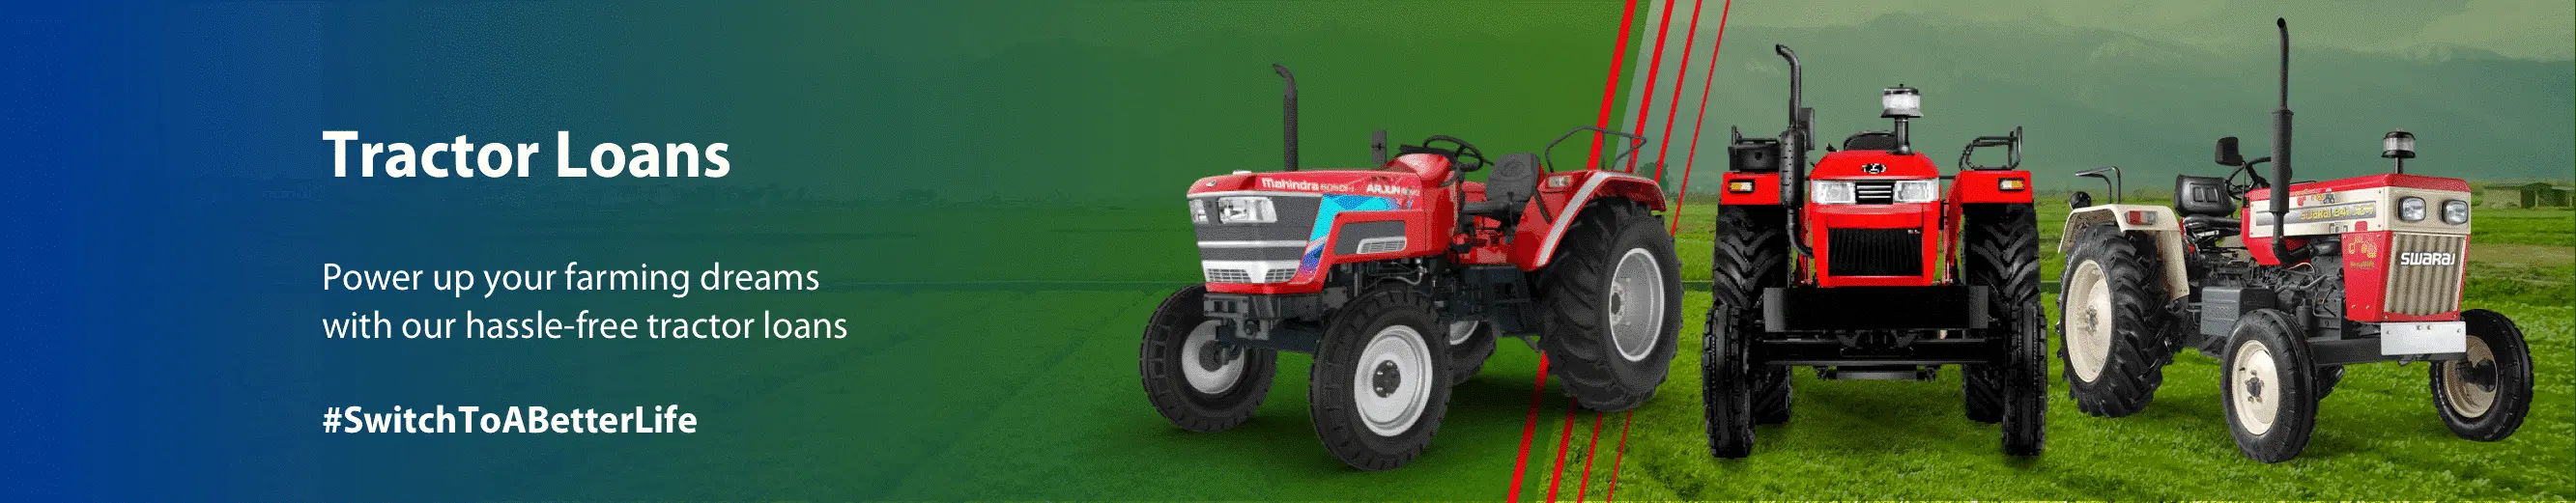 Chola Tractor Loans